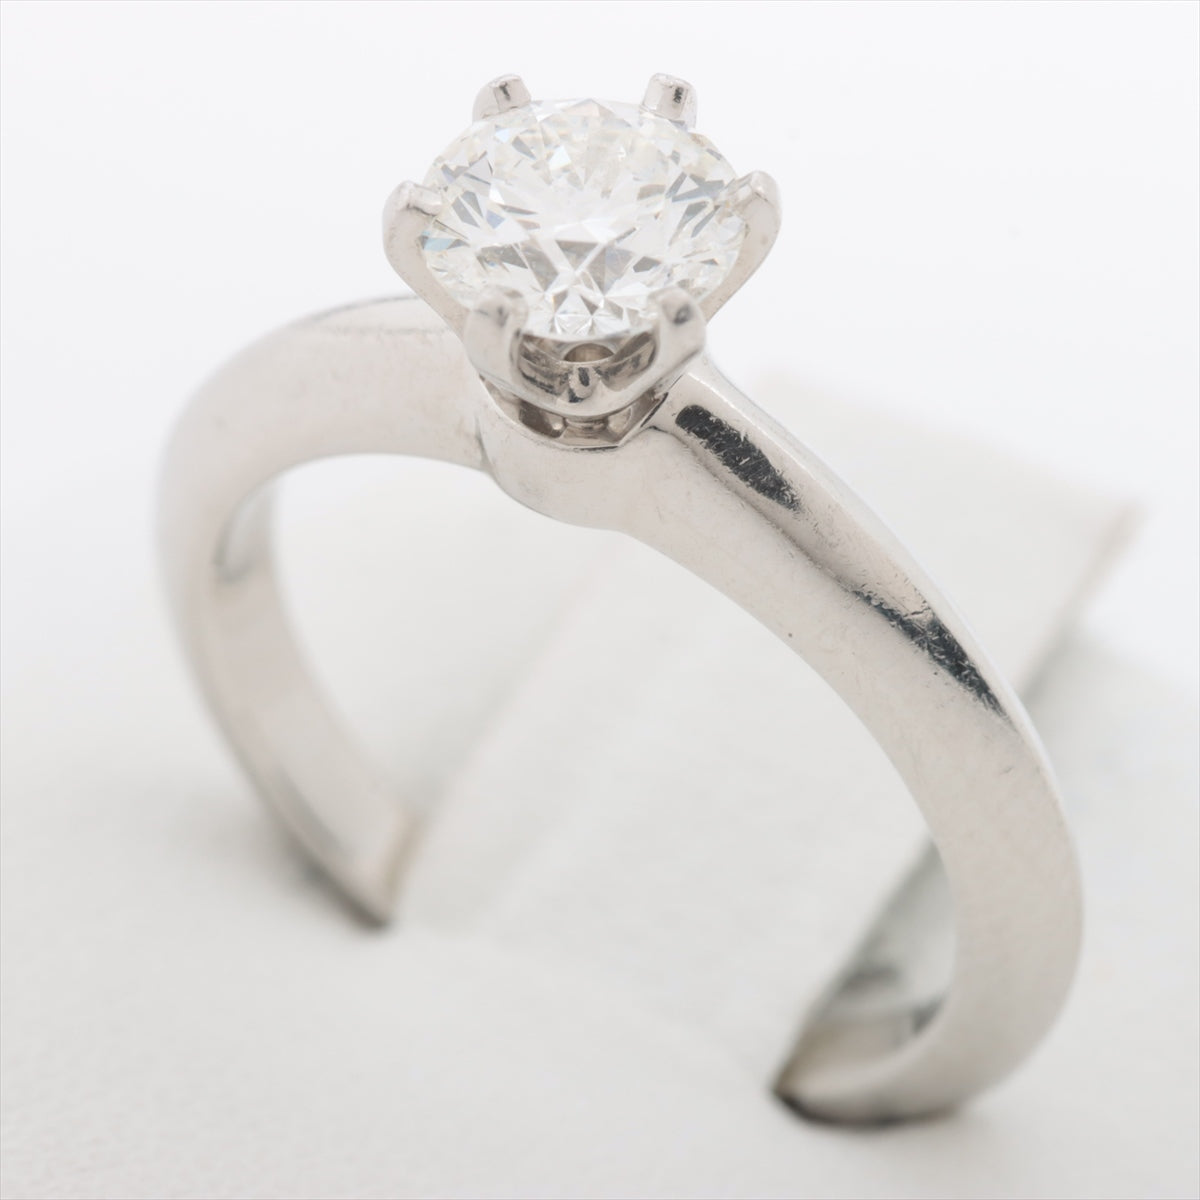 Tiffany Solitaire diamond rings Pt950 5.2g 0.69 Stamped thin